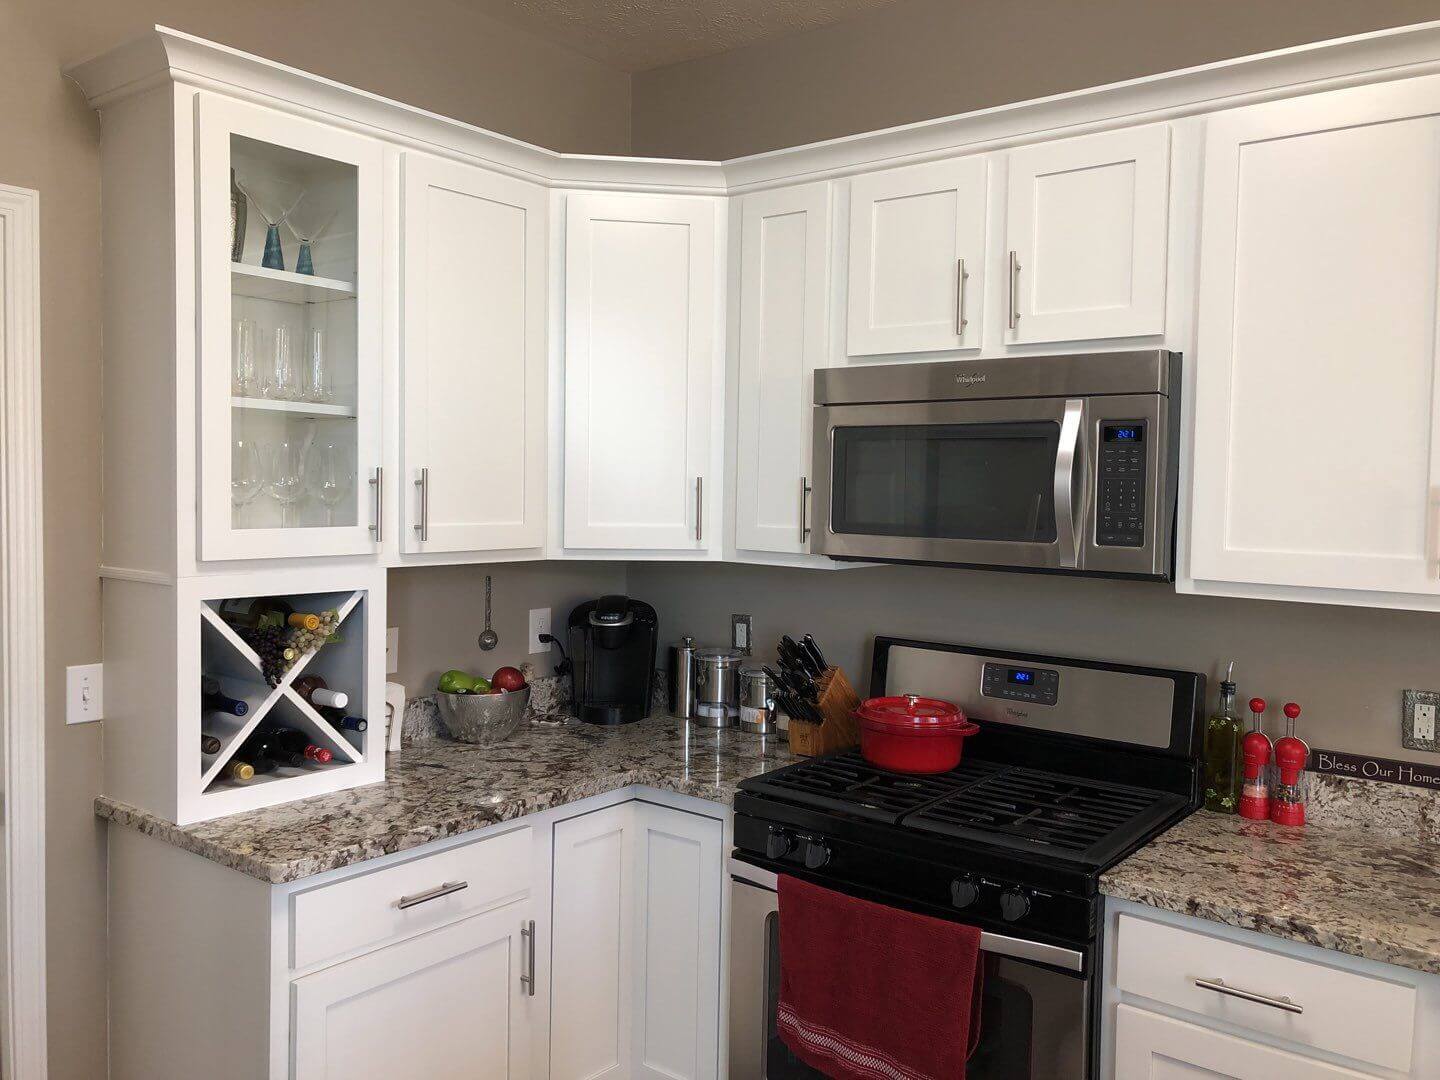 what color should i paint my kitchen cabinets? | textbook